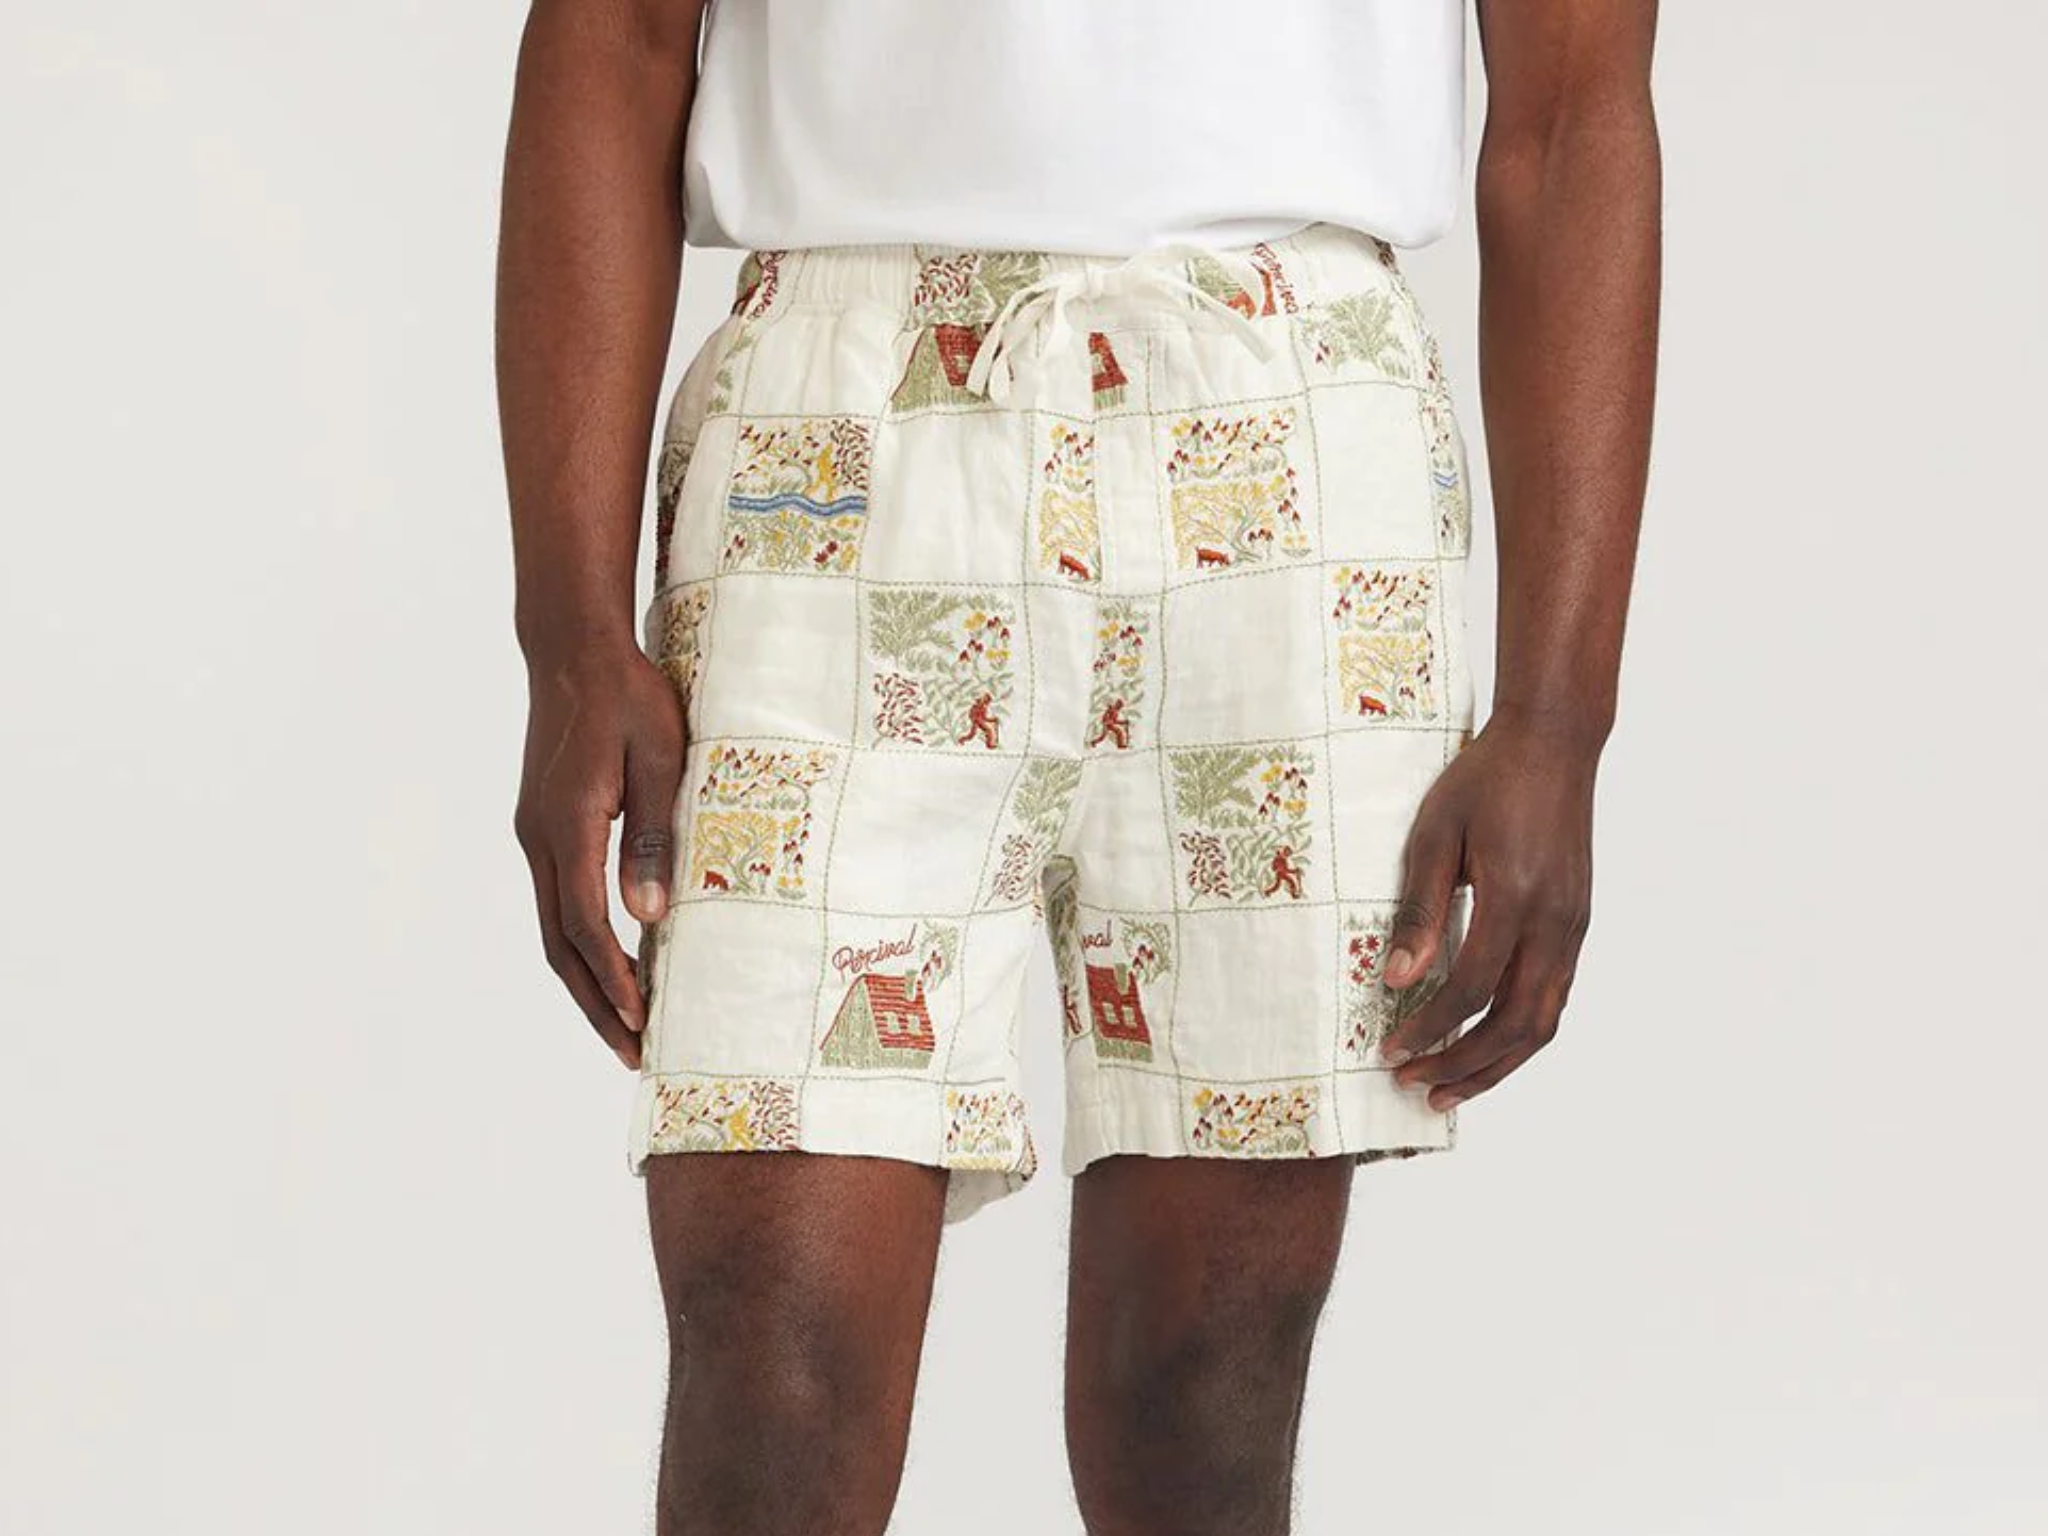 Percvial embroidered linen shorts